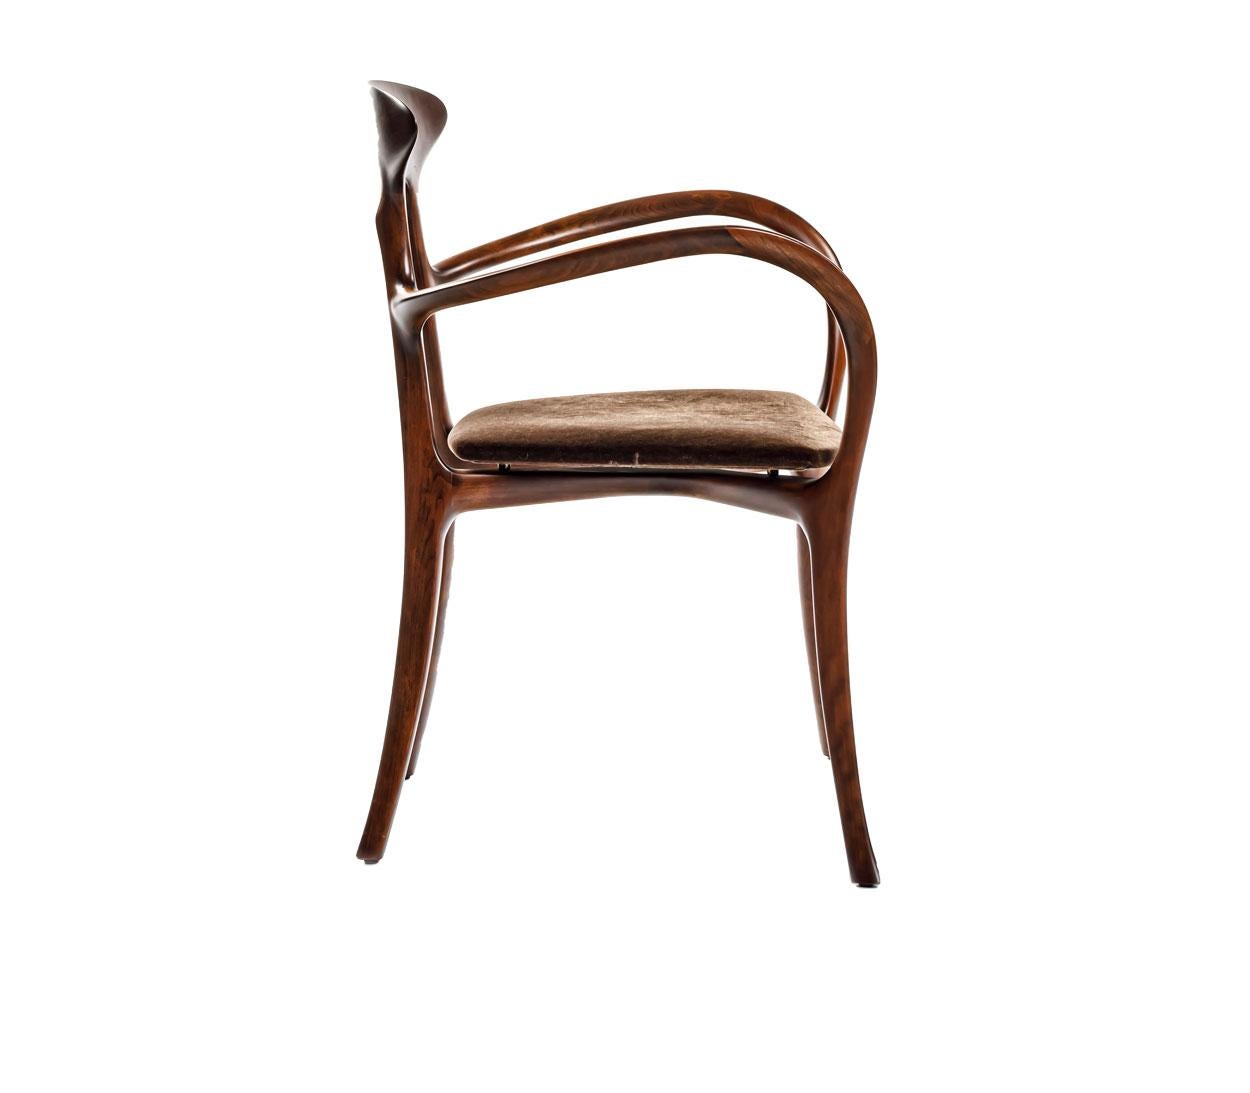 A chair made in solid American walnut wood with a cherrywood stain and semi-gloss finish, curved plywood seat upholstered in dark brown velvet. 
by Roberto Lazzeroni for Ceccotti Collezioni.